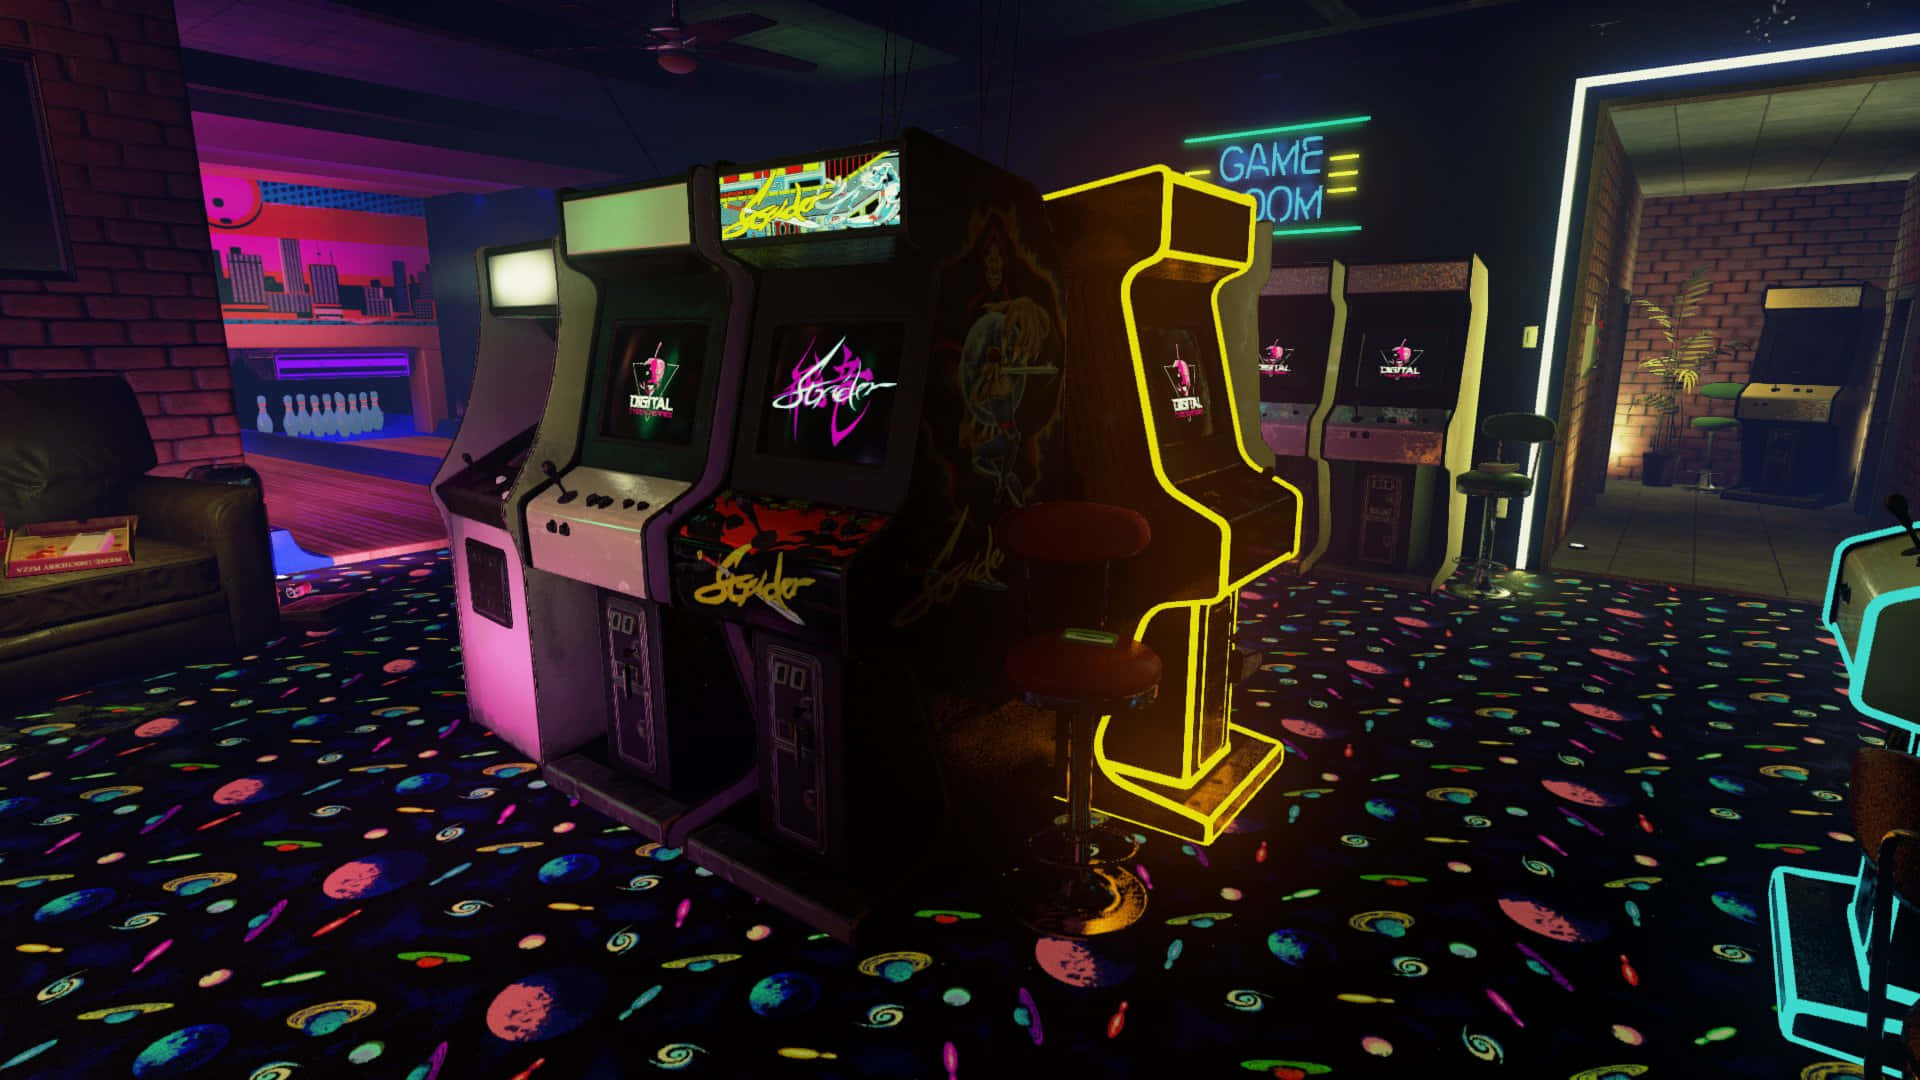 Embracing the Neon Aesthetic of an Arcade Wallpaper